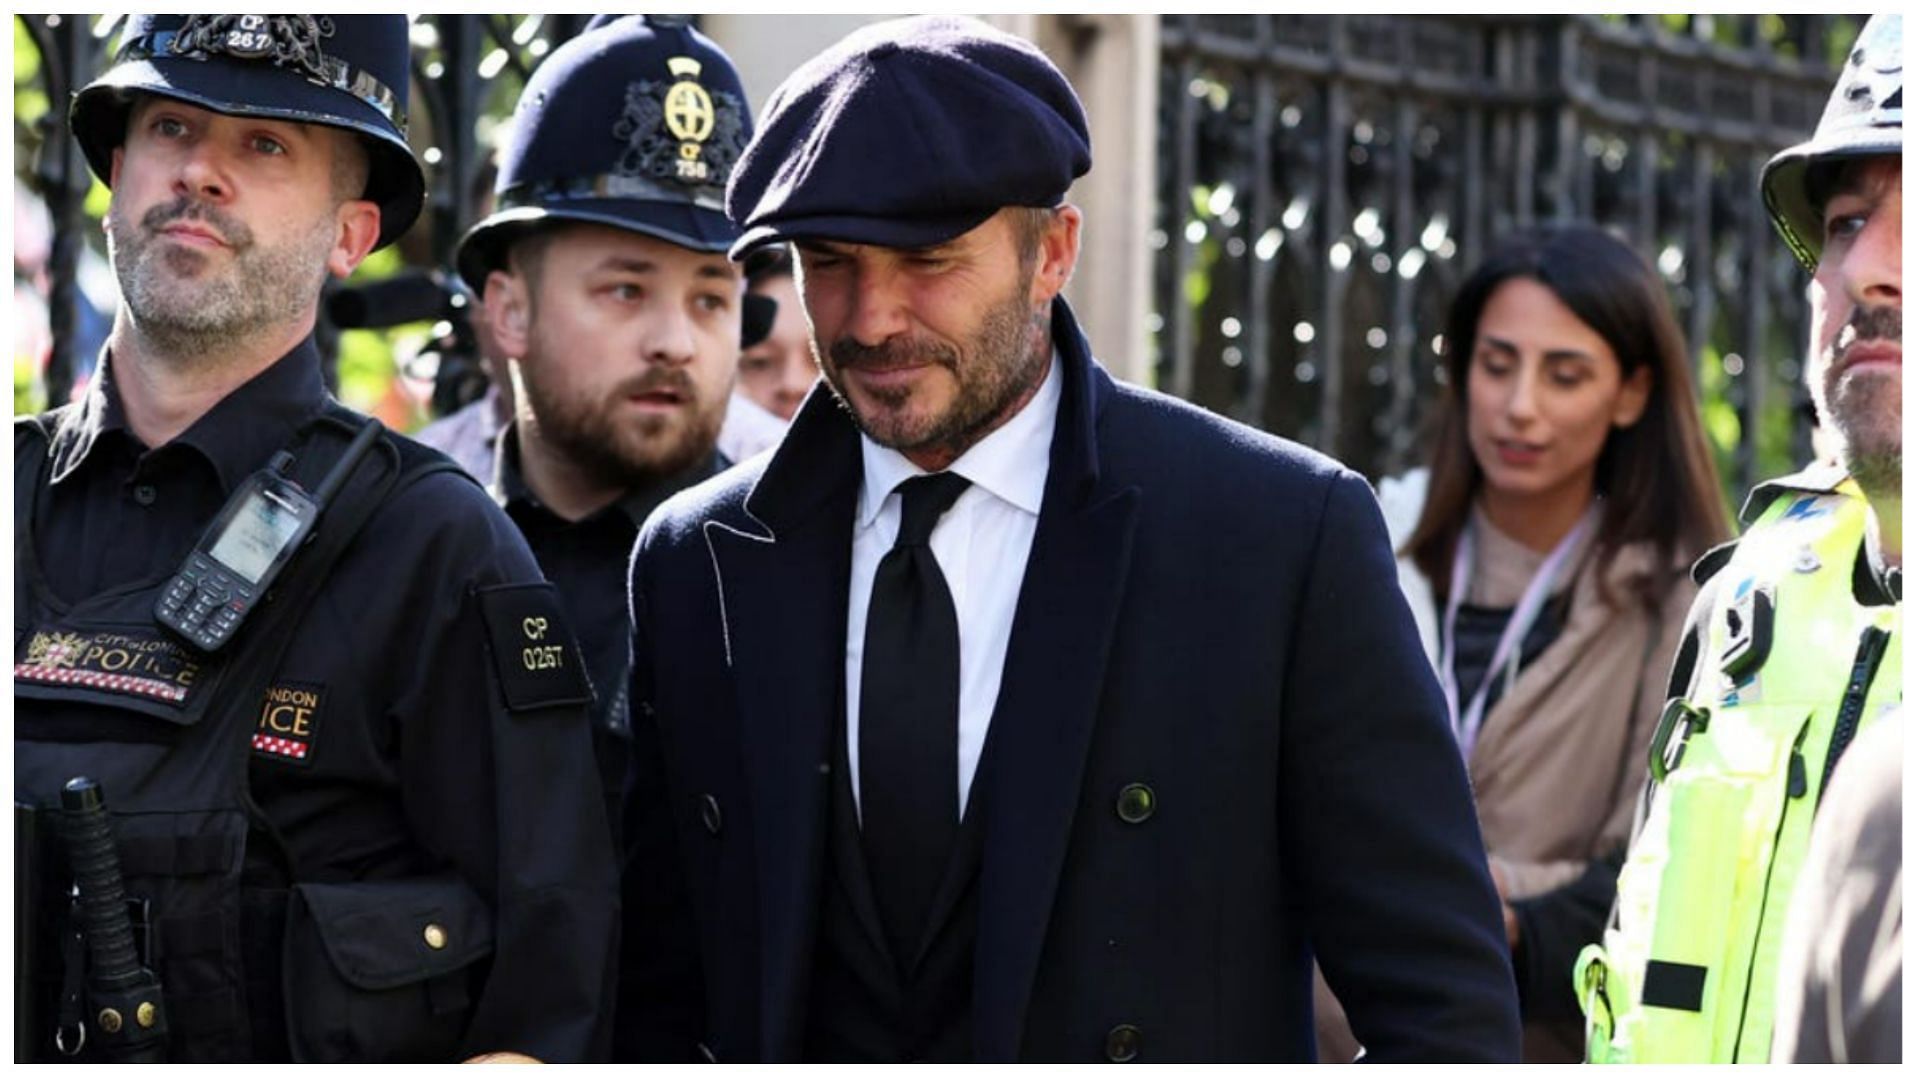 English football player David Beckham visits Queen Elizabeth II&rsquo;s coffin at Westminster Hall, London (image via Getty images/Anadolu Agency)